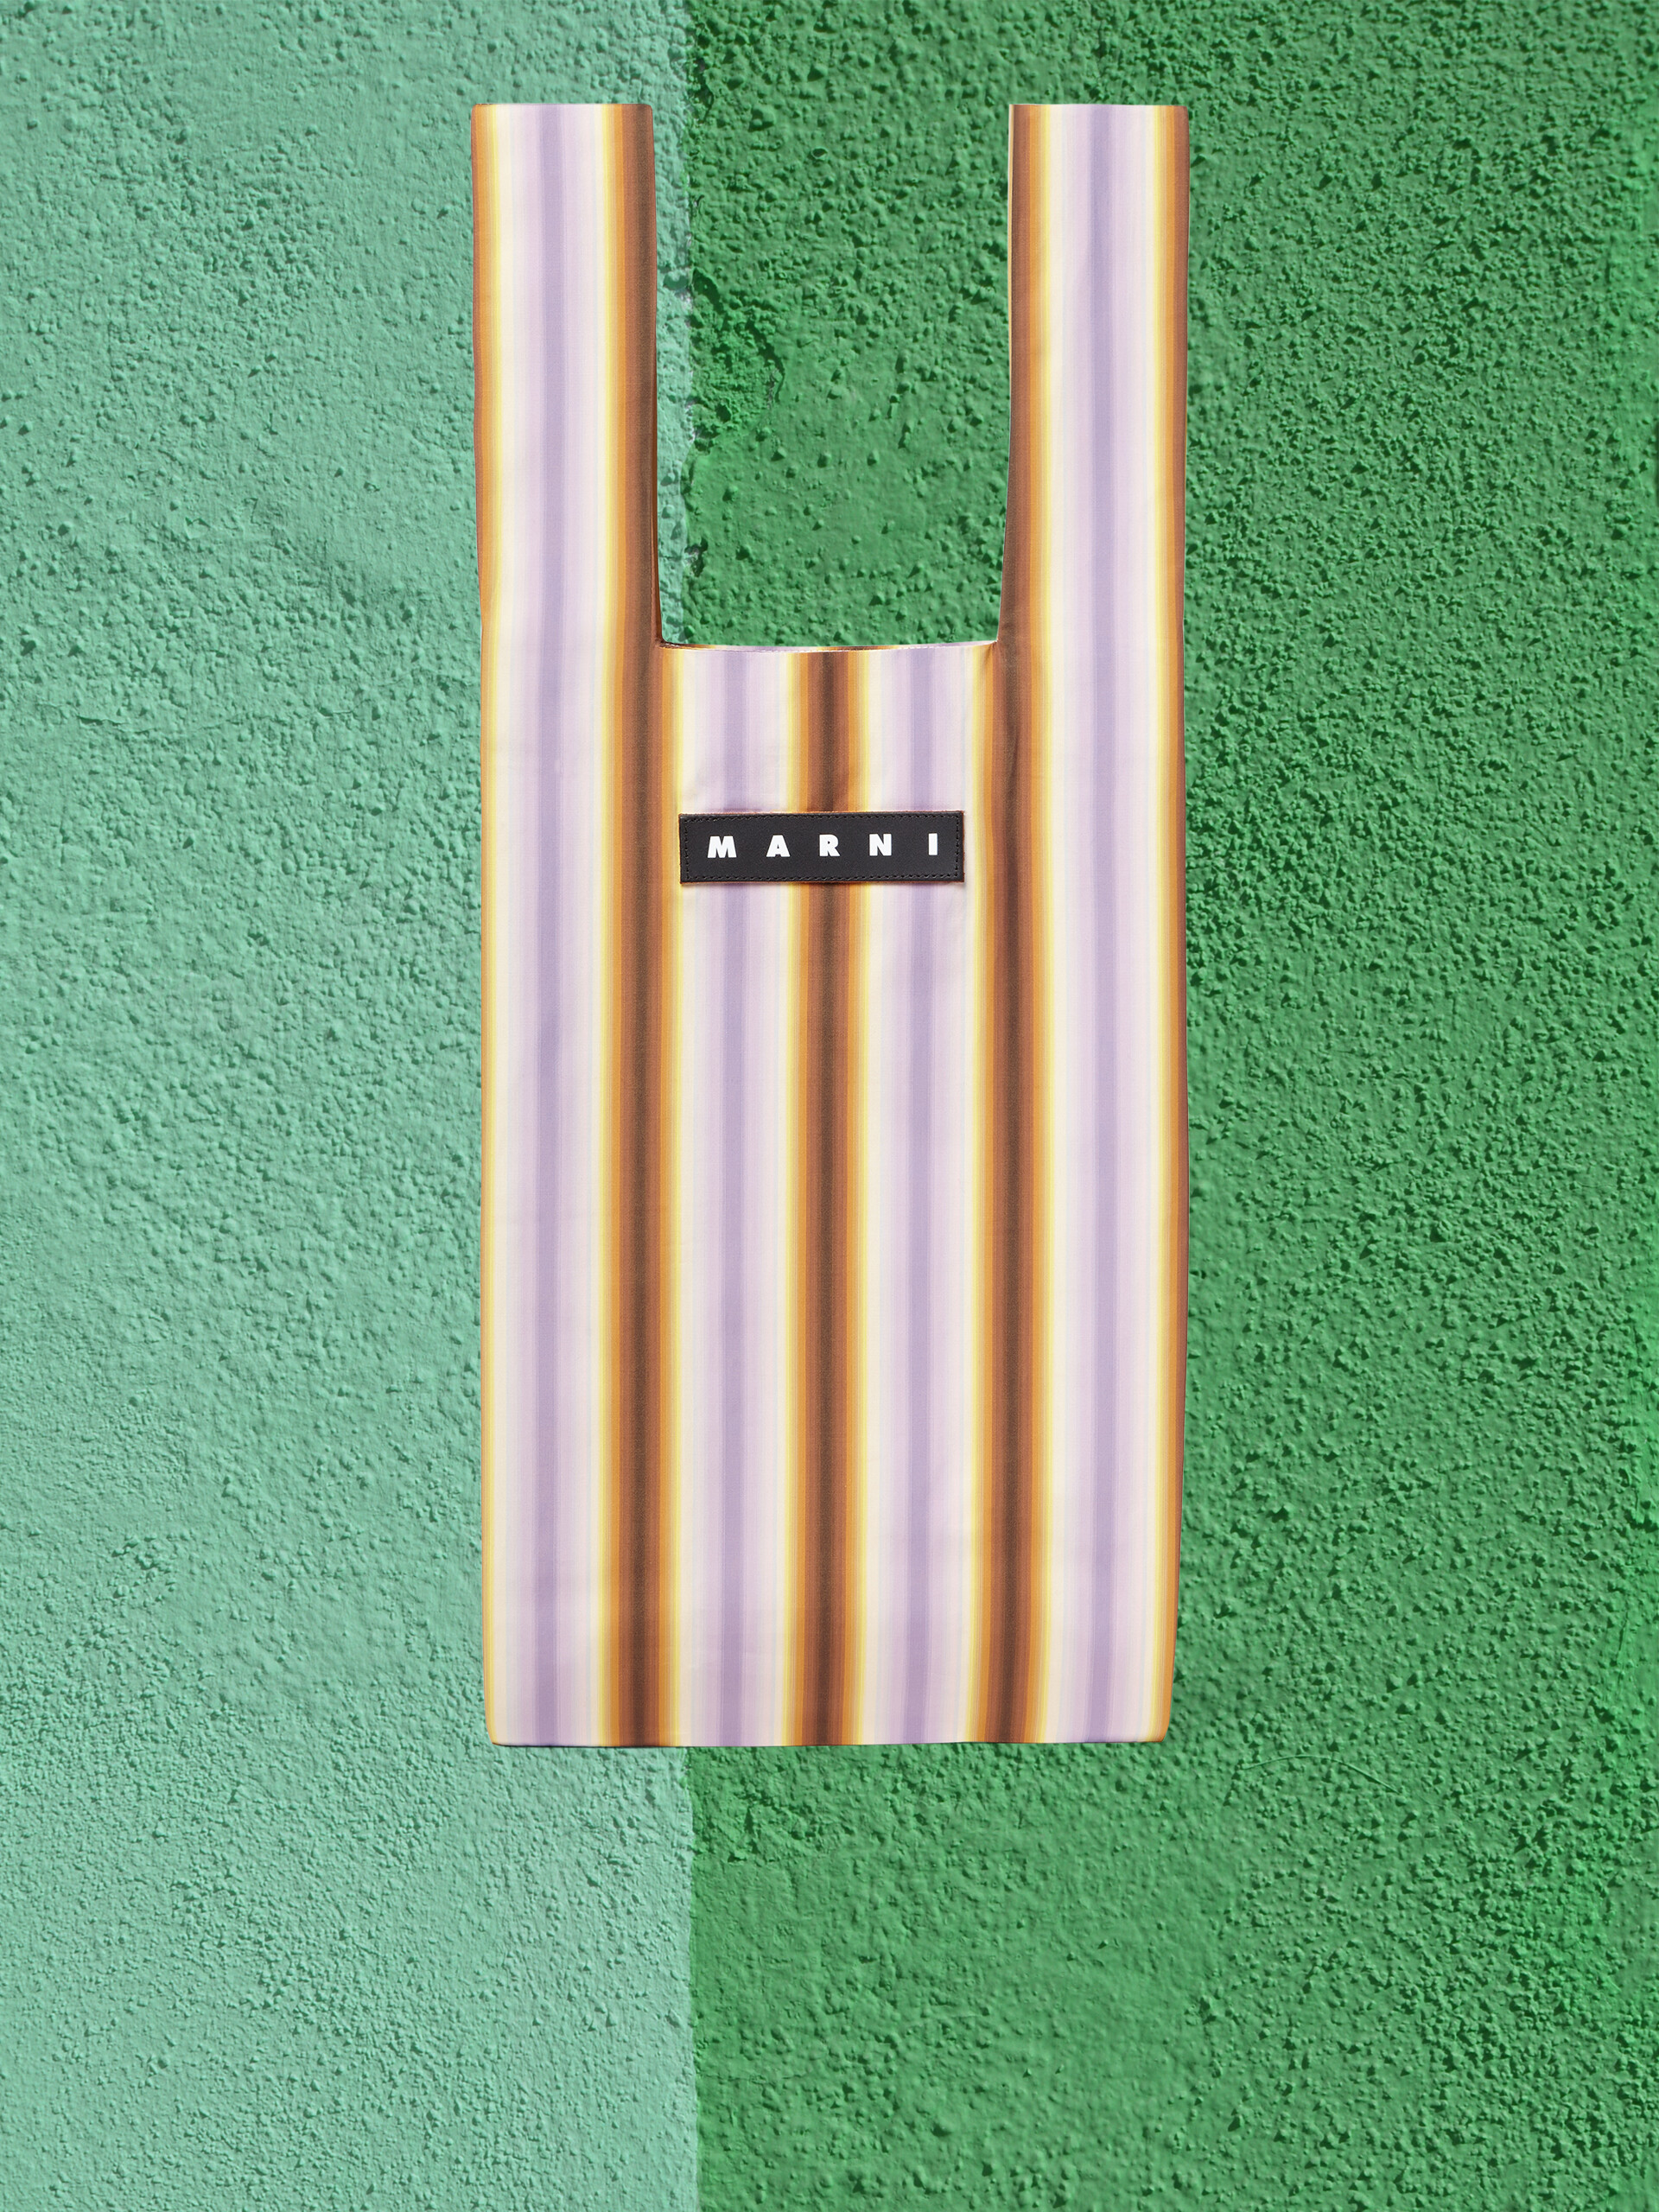 MARNI MARKET cotton shopping bag with pink and orange stripes - Shopping Bags - Image 1